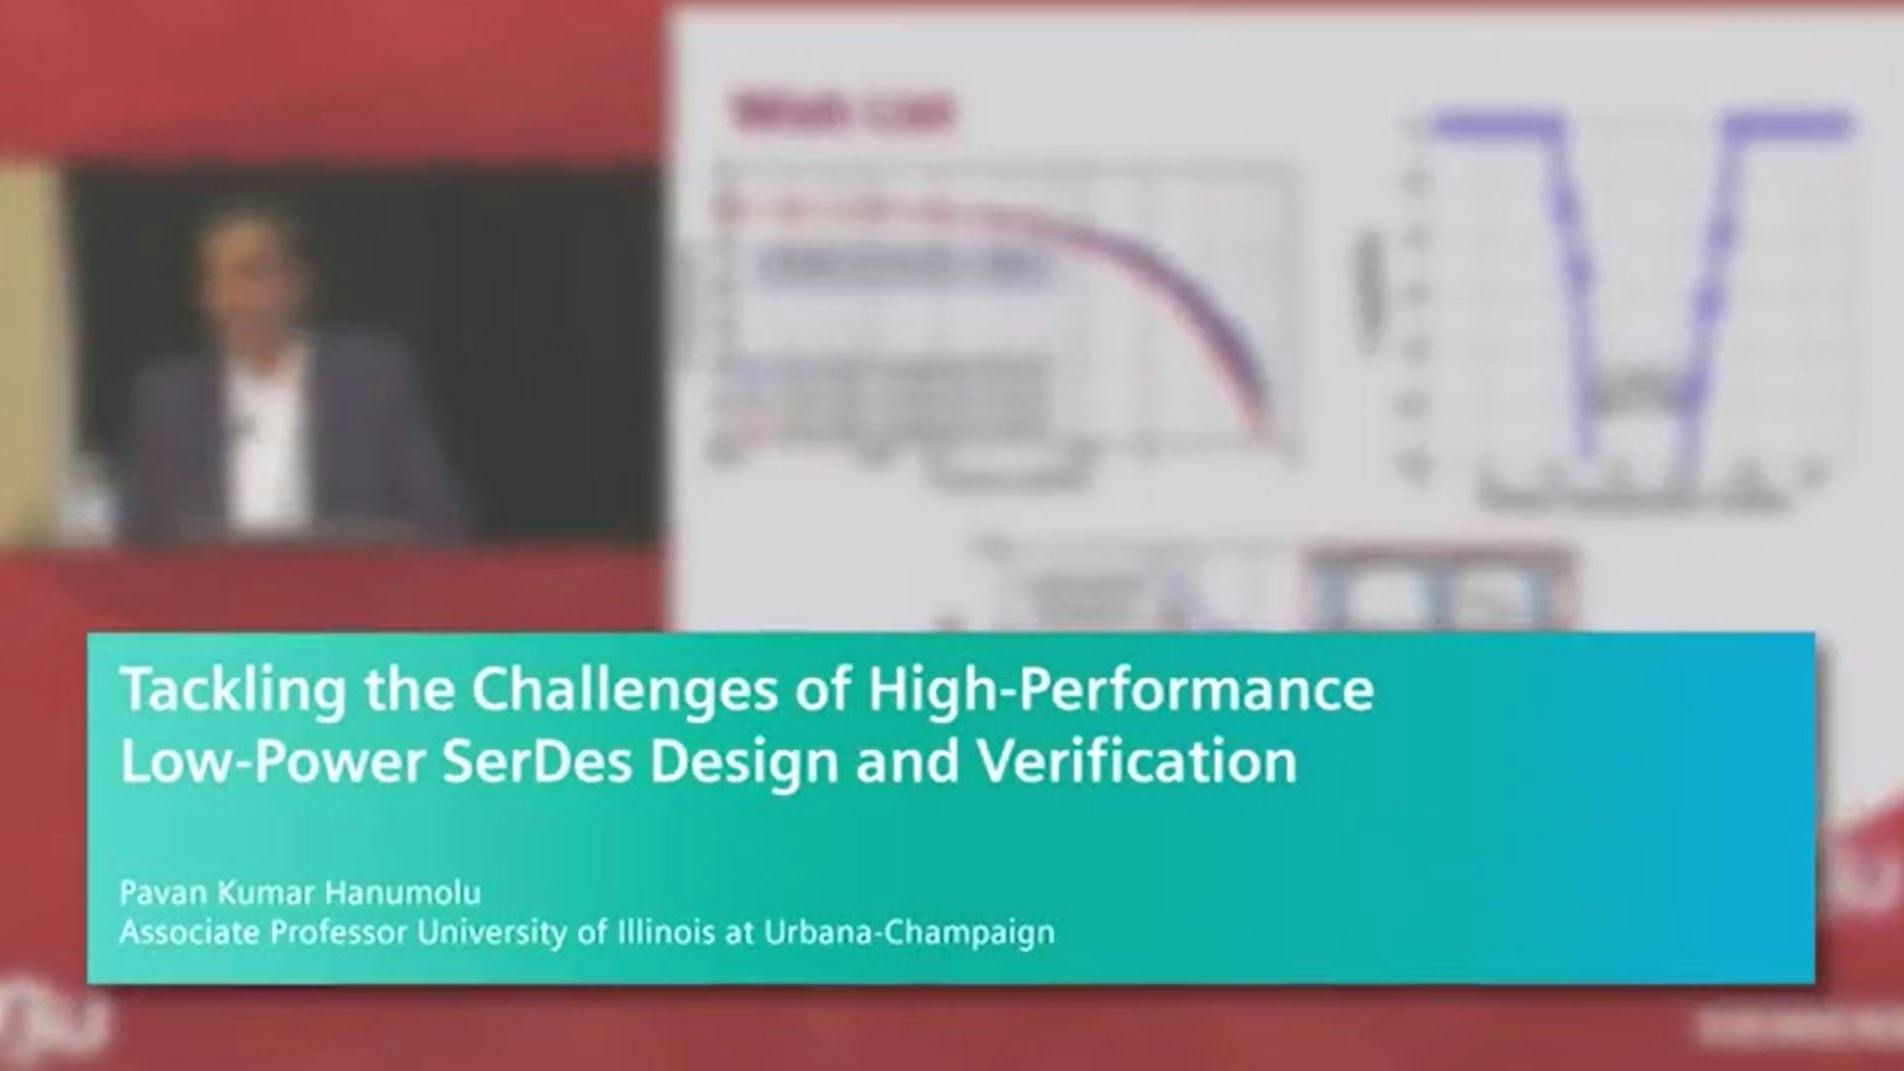 Tackling the Challenges of High-Performance Low-Power SerDes Design and Verification